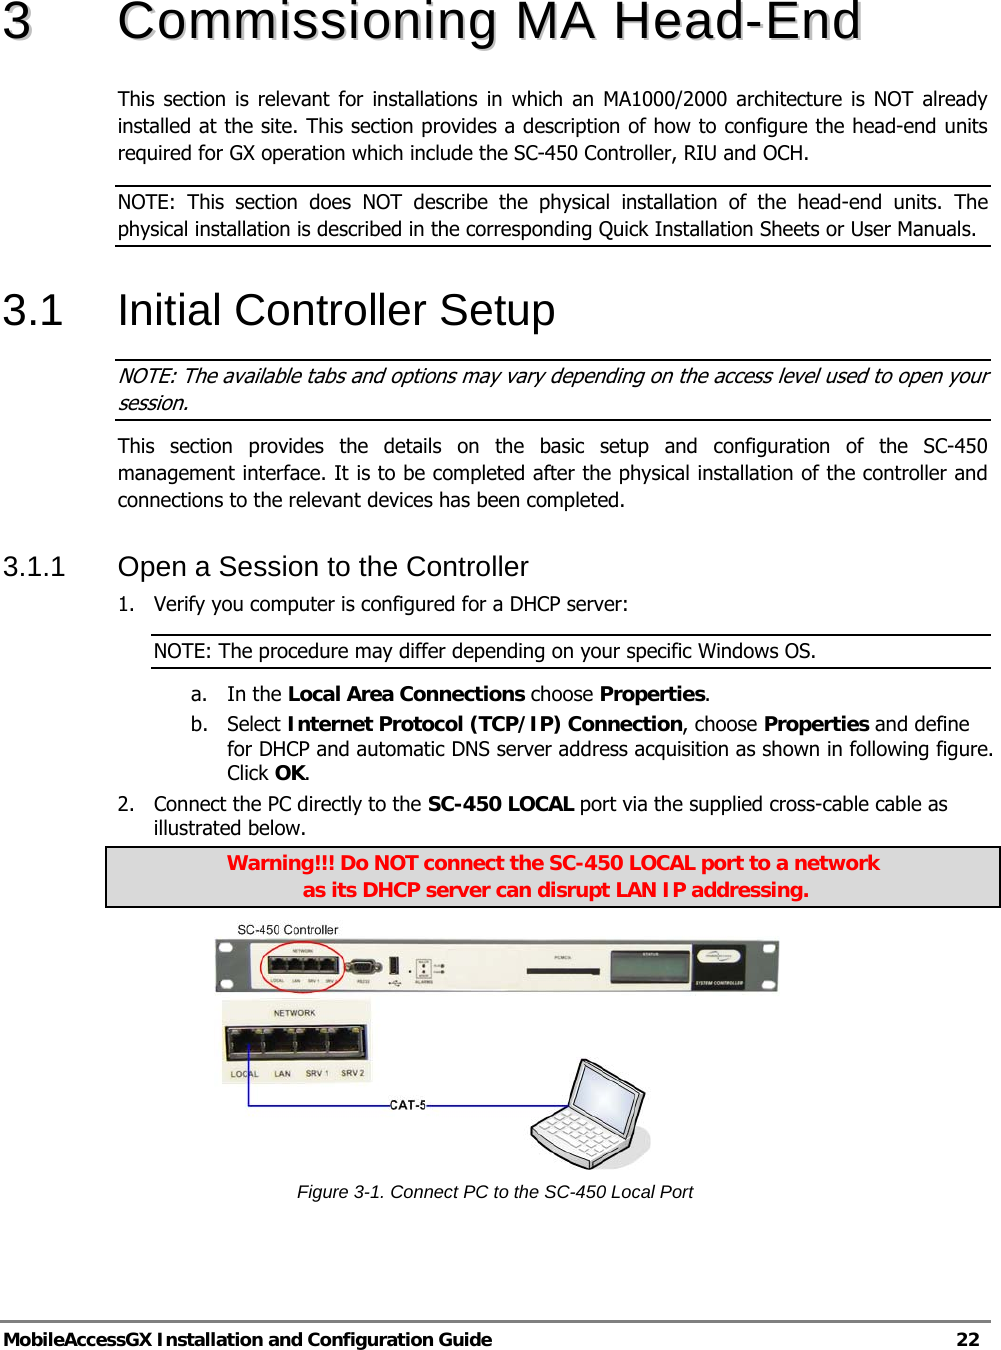   MobileAccessGX Installation and Configuration Guide   22  33  CCoommmmiissssiioonniinngg  MMAA  HHeeaadd--EEnndd    This section is relevant for installations in which an MA1000/2000 architecture is NOT already installed at the site. This section provides a description of how to configure the head-end units required for GX operation which include the SC-450 Controller, RIU and OCH.  NOTE: This section does NOT describe the physical installation of the head-end units. The physical installation is described in the corresponding Quick Installation Sheets or User Manuals. 3.1 Initial Controller Setup NOTE: The available tabs and options may vary depending on the access level used to open your session. This section provides the details on the basic setup and configuration of the SC-450 management interface. It is to be completed after the physical installation of the controller and connections to the relevant devices has been completed. 3.1.1  Open a Session to the Controller 1.  Verify you computer is configured for a DHCP server: NOTE: The procedure may differ depending on your specific Windows OS. a. In the Local Area Connections choose Properties. b. Select Internet Protocol (TCP/IP) Connection, choose Properties and define for DHCP and automatic DNS server address acquisition as shown in following figure. Click OK. 2.  Connect the PC directly to the SC-450 LOCAL port via the supplied cross-cable cable as illustrated below.  Warning!!! Do NOT connect the SC-450 LOCAL port to a network  as its DHCP server can disrupt LAN IP addressing.  Figure 3-1. Connect PC to the SC-450 Local Port   Supplied Ethernet cross-cable 